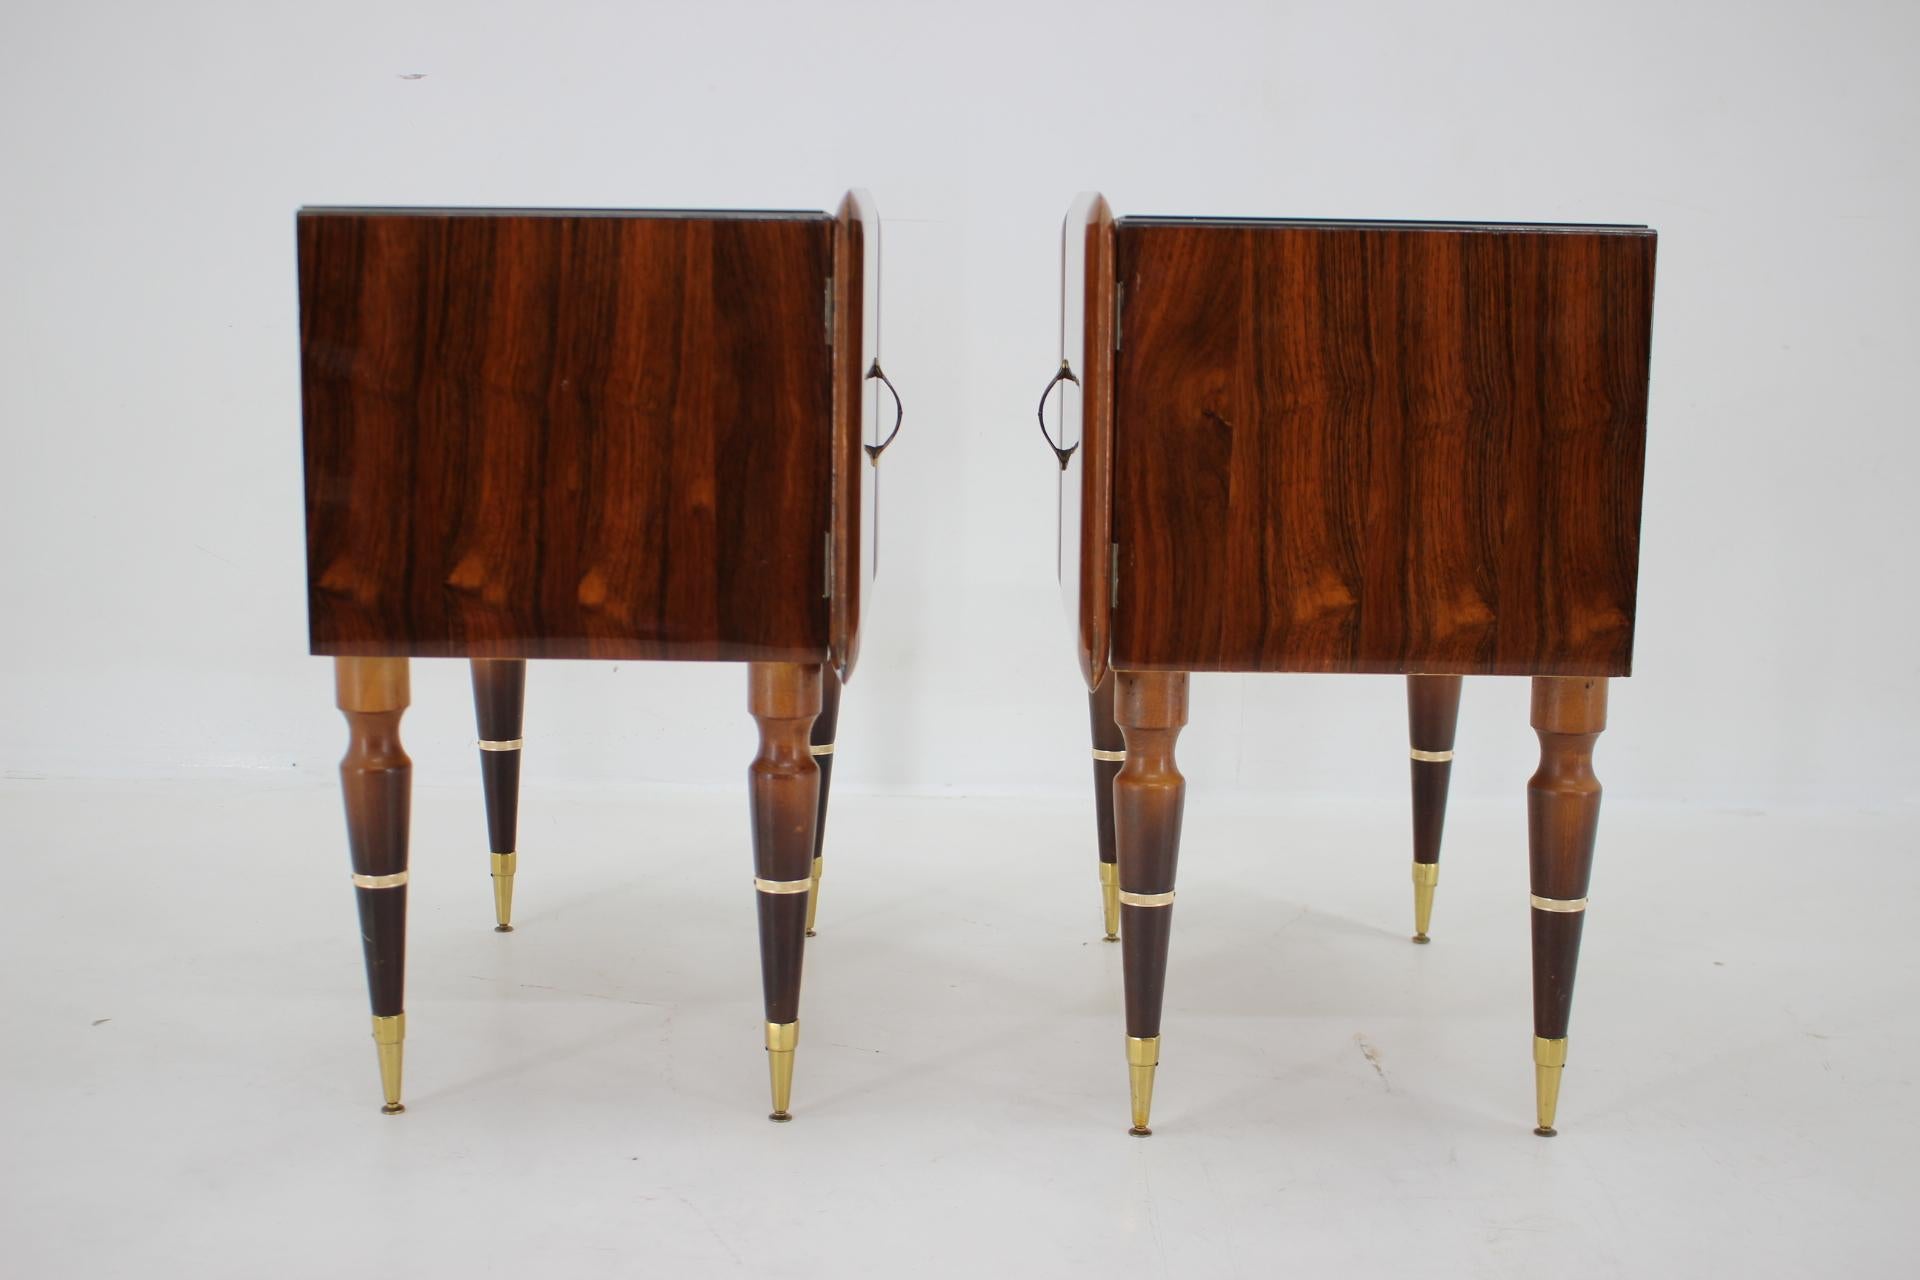 1960s Pair of Sculptural Wooden Bedside Tables, Italy In Good Condition For Sale In Praha, CZ